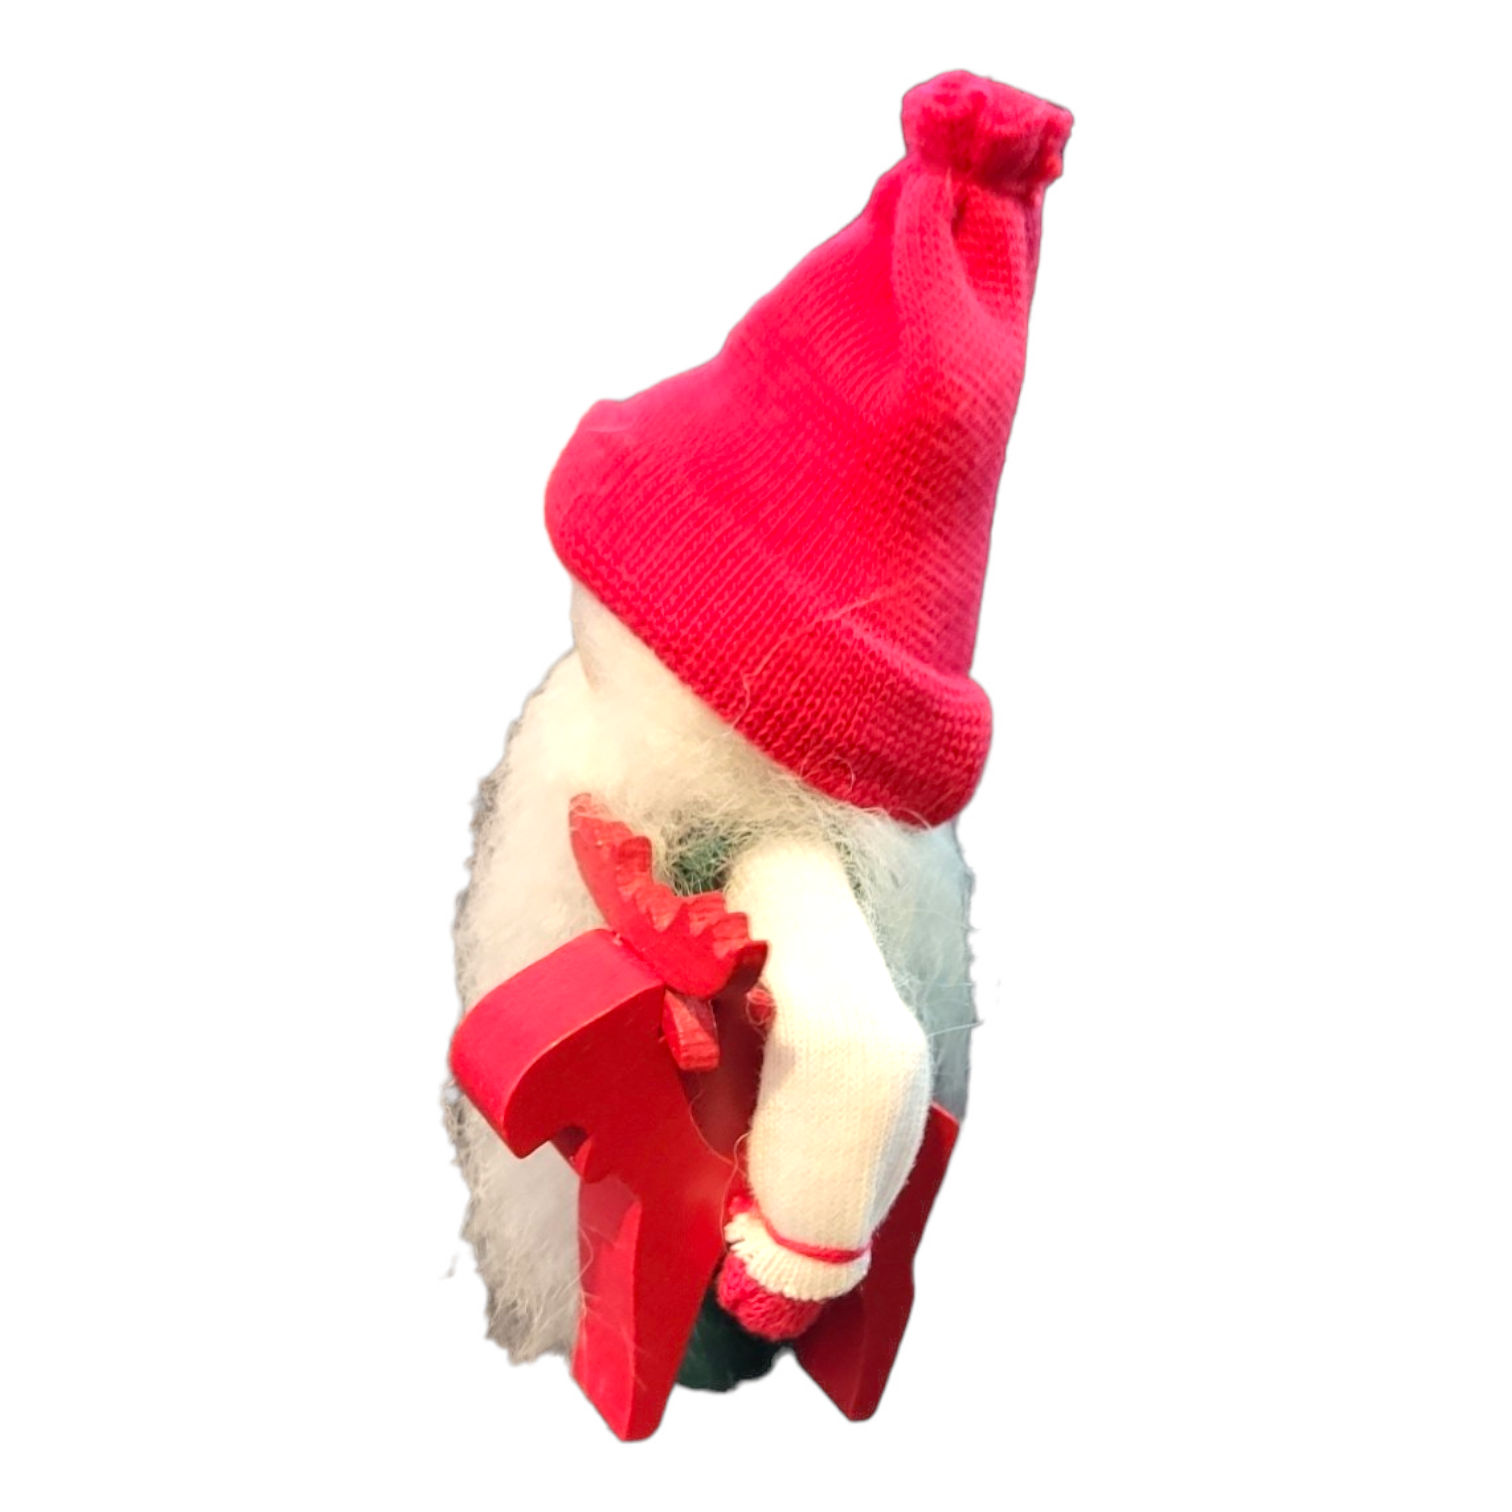 Figurine: Tomte with Red Moose